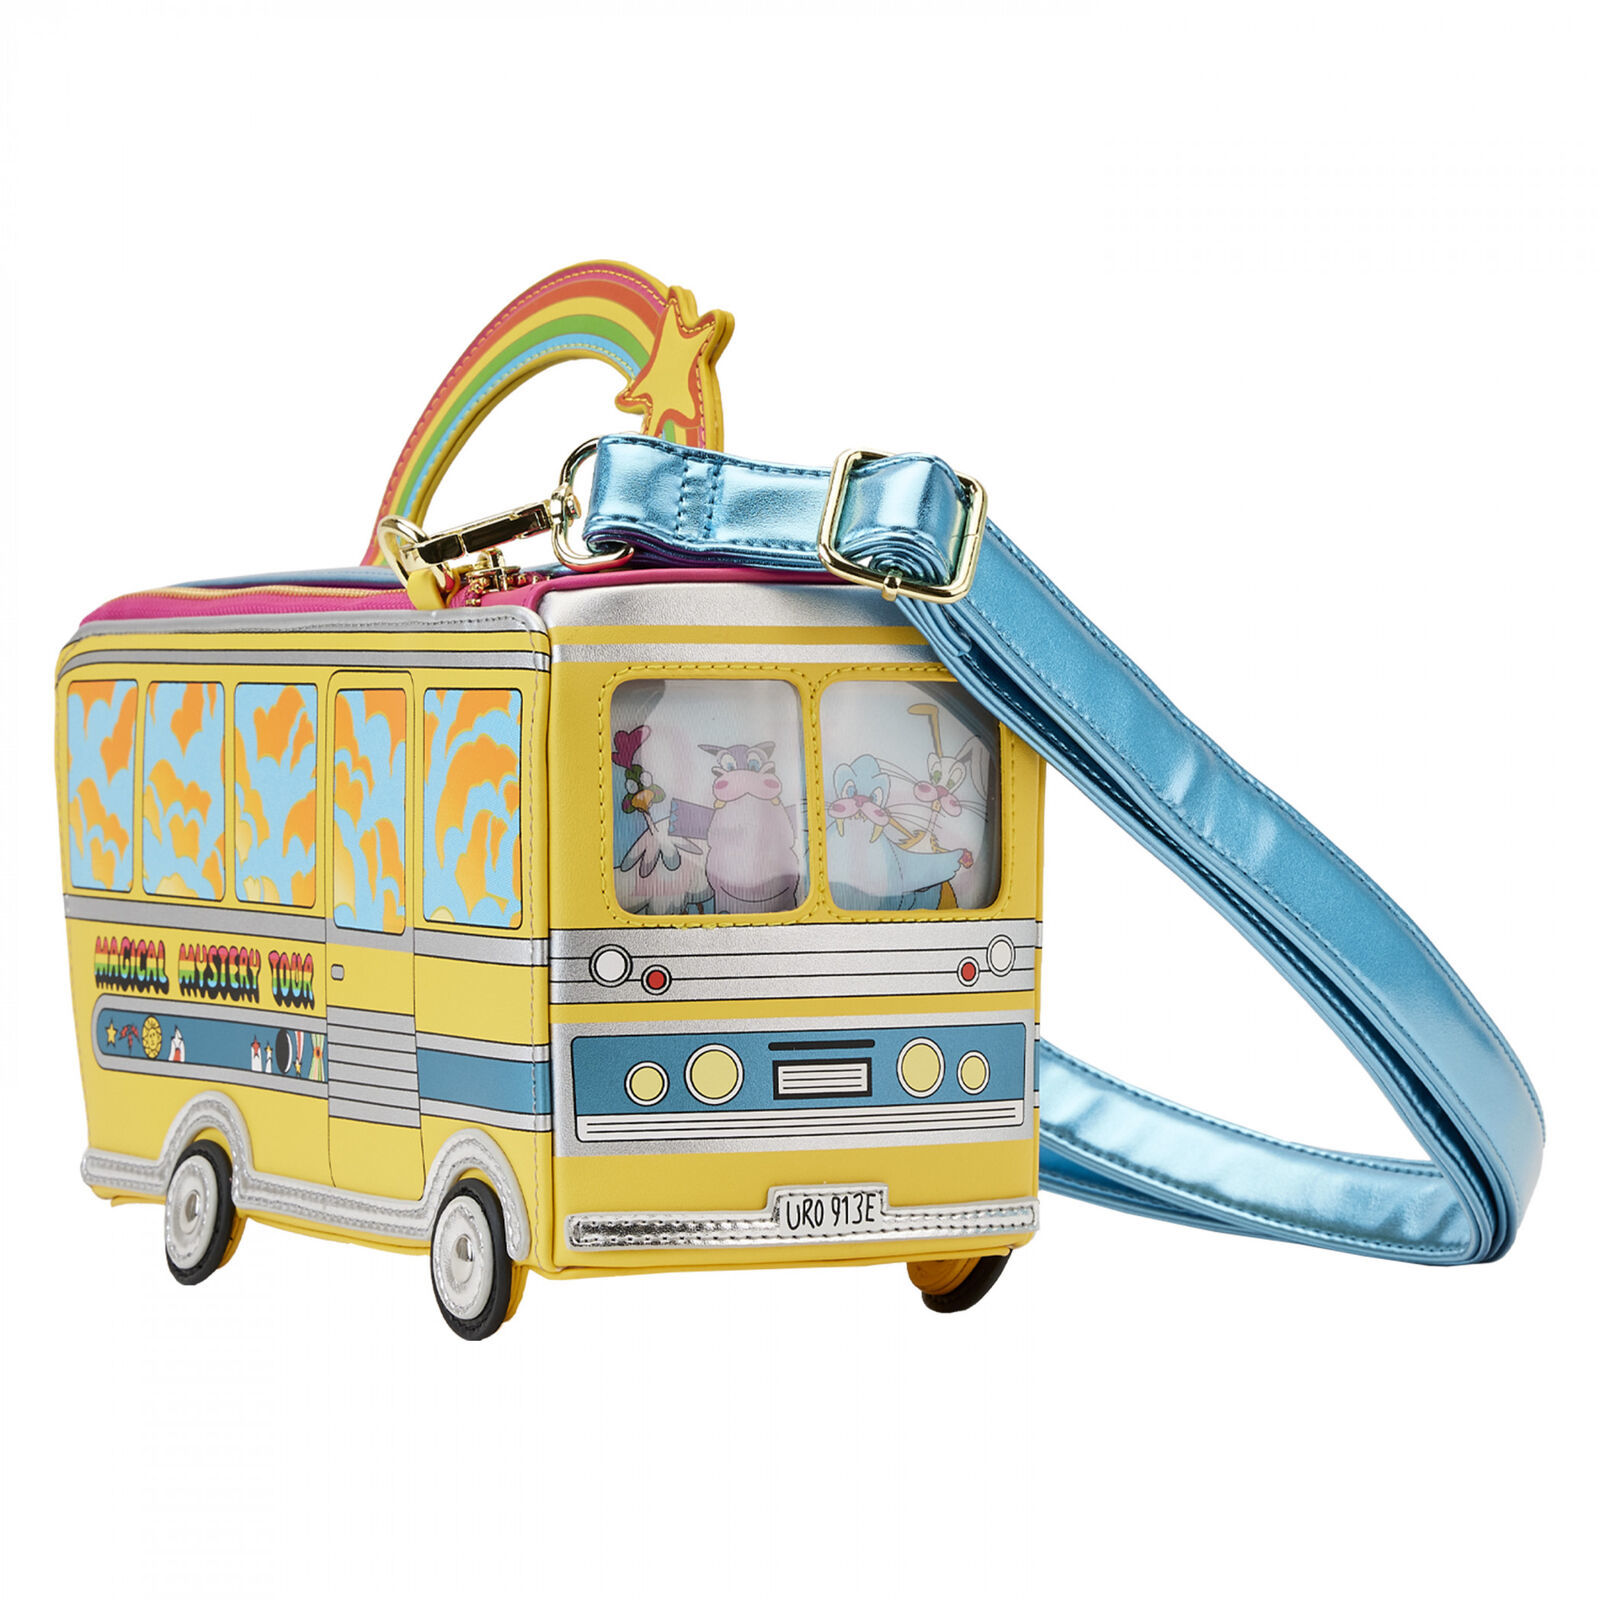 Primary image for The Beatles Magical Mystery Tour Bus Crossbody Bag by Loungefly Multi-Color